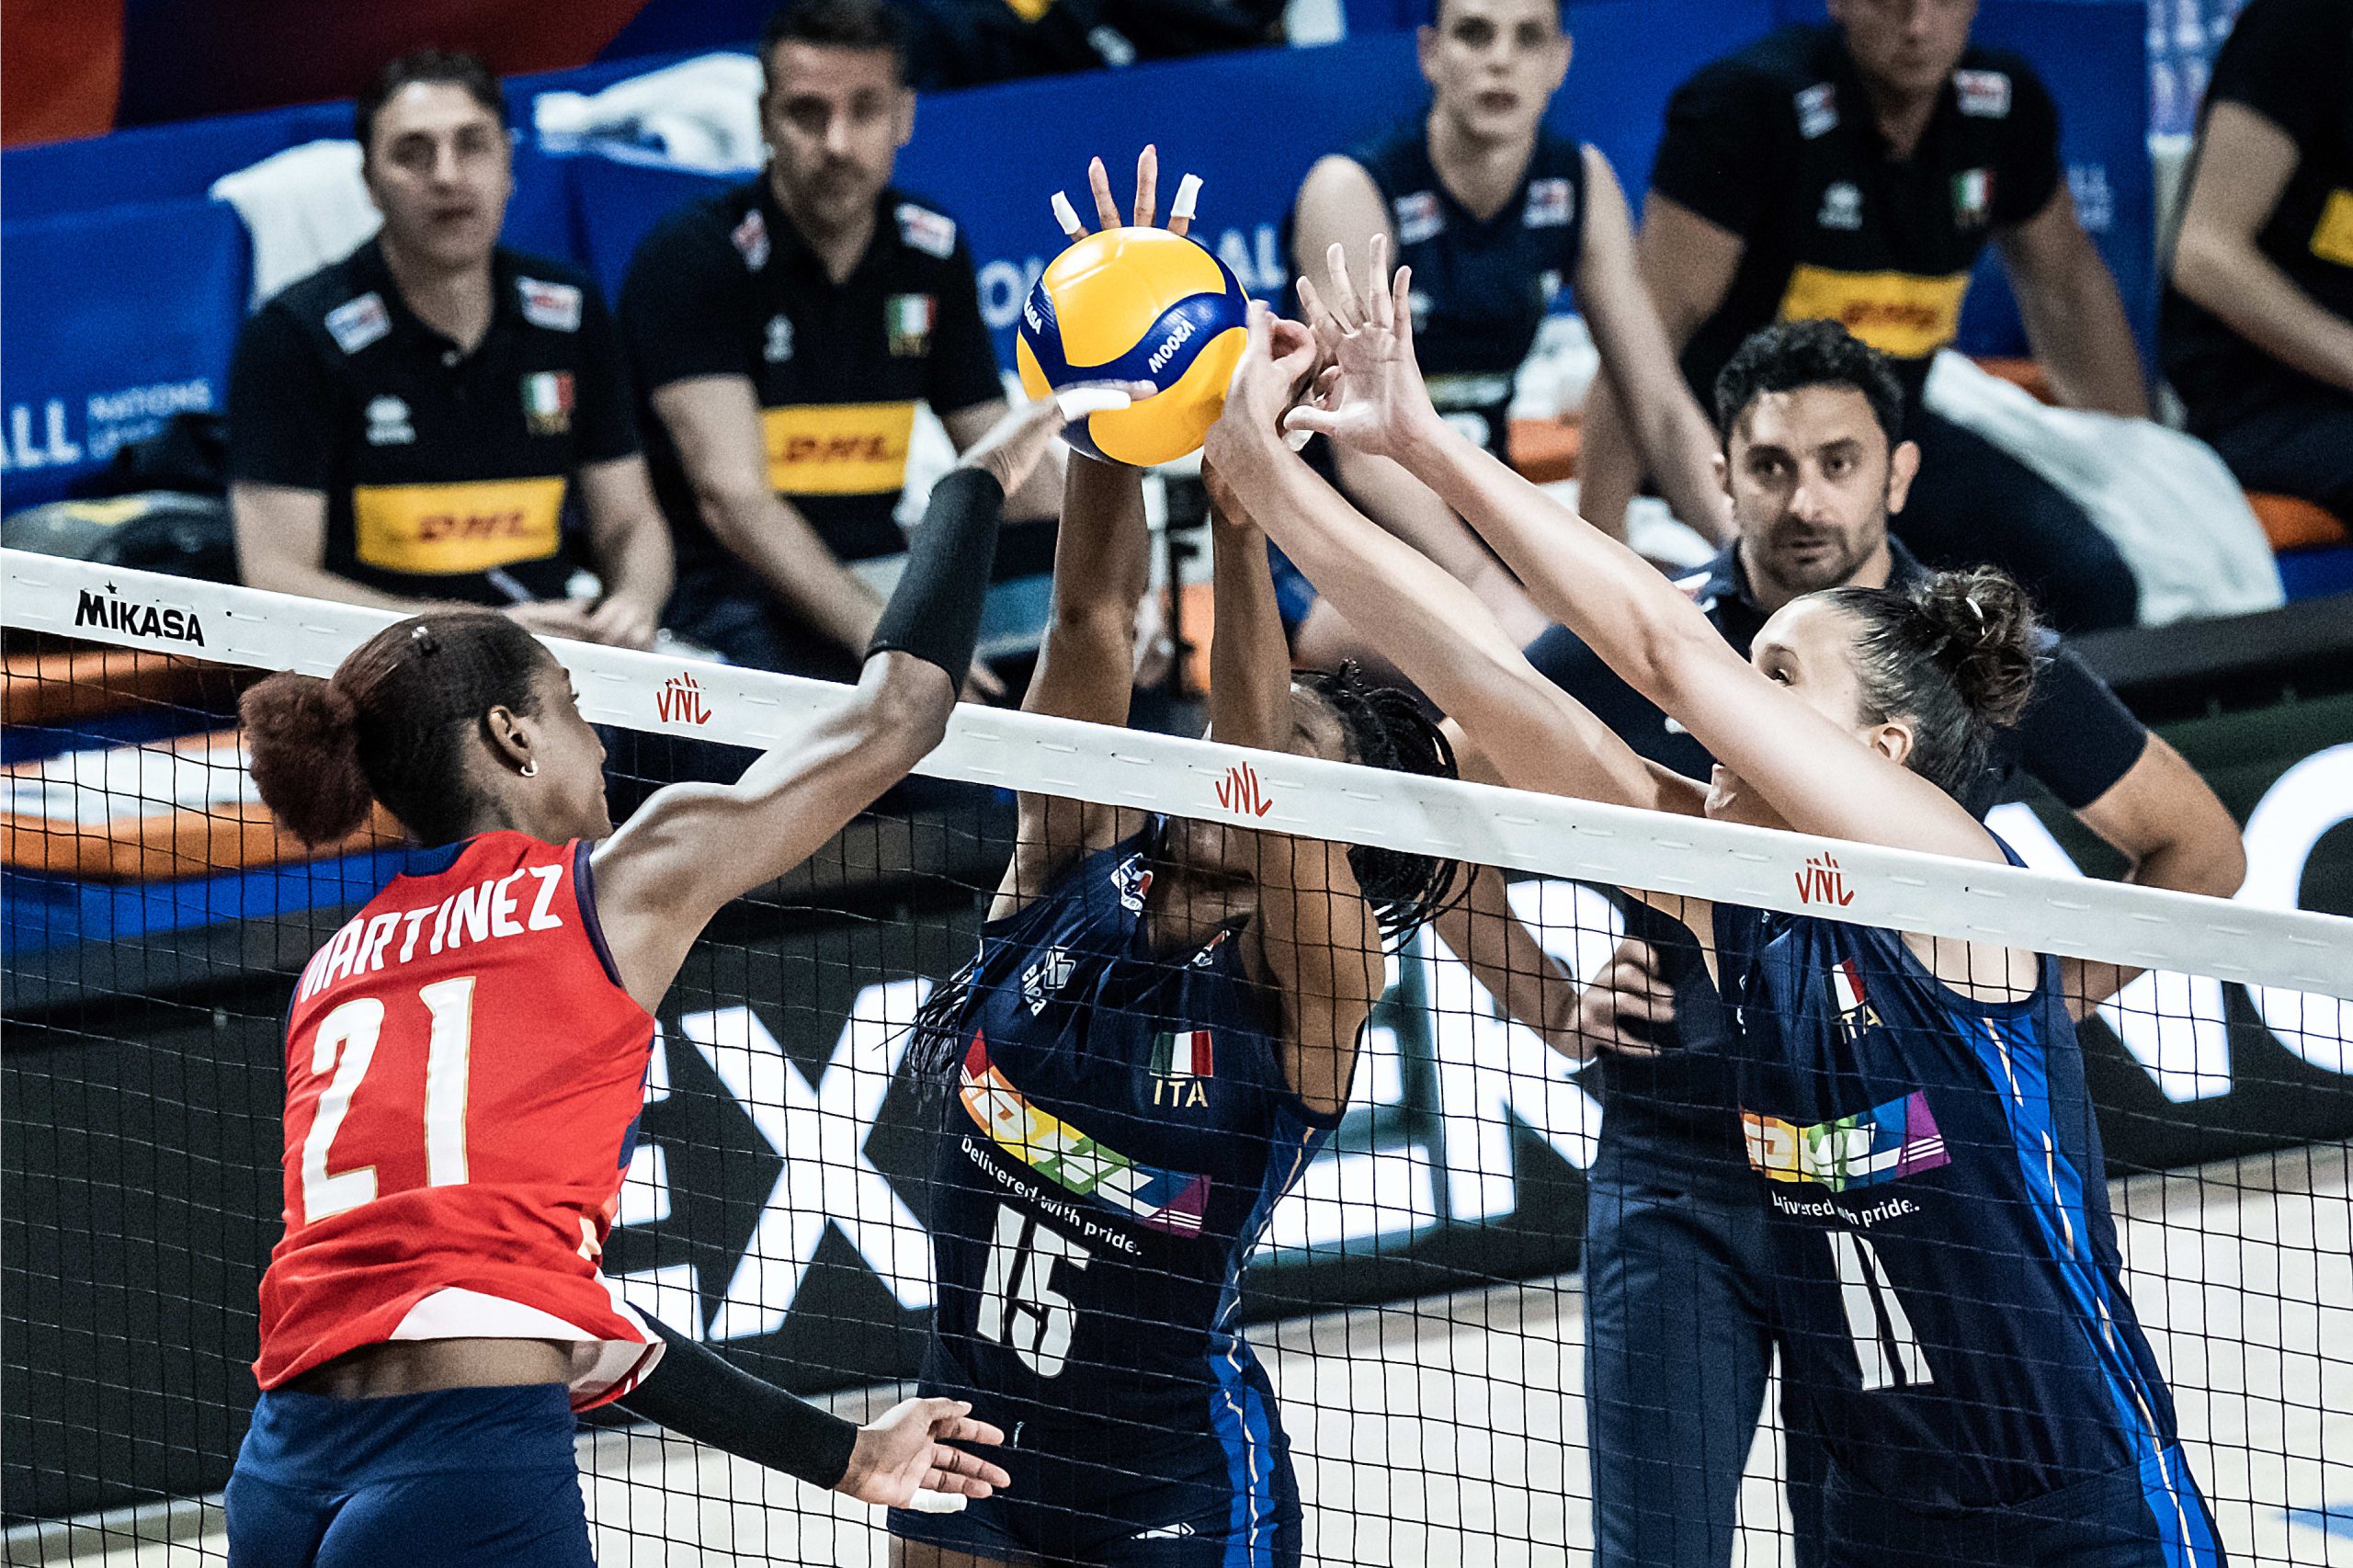 Dominican Republic loses to VNL reigning champion Italy in five-set thriller